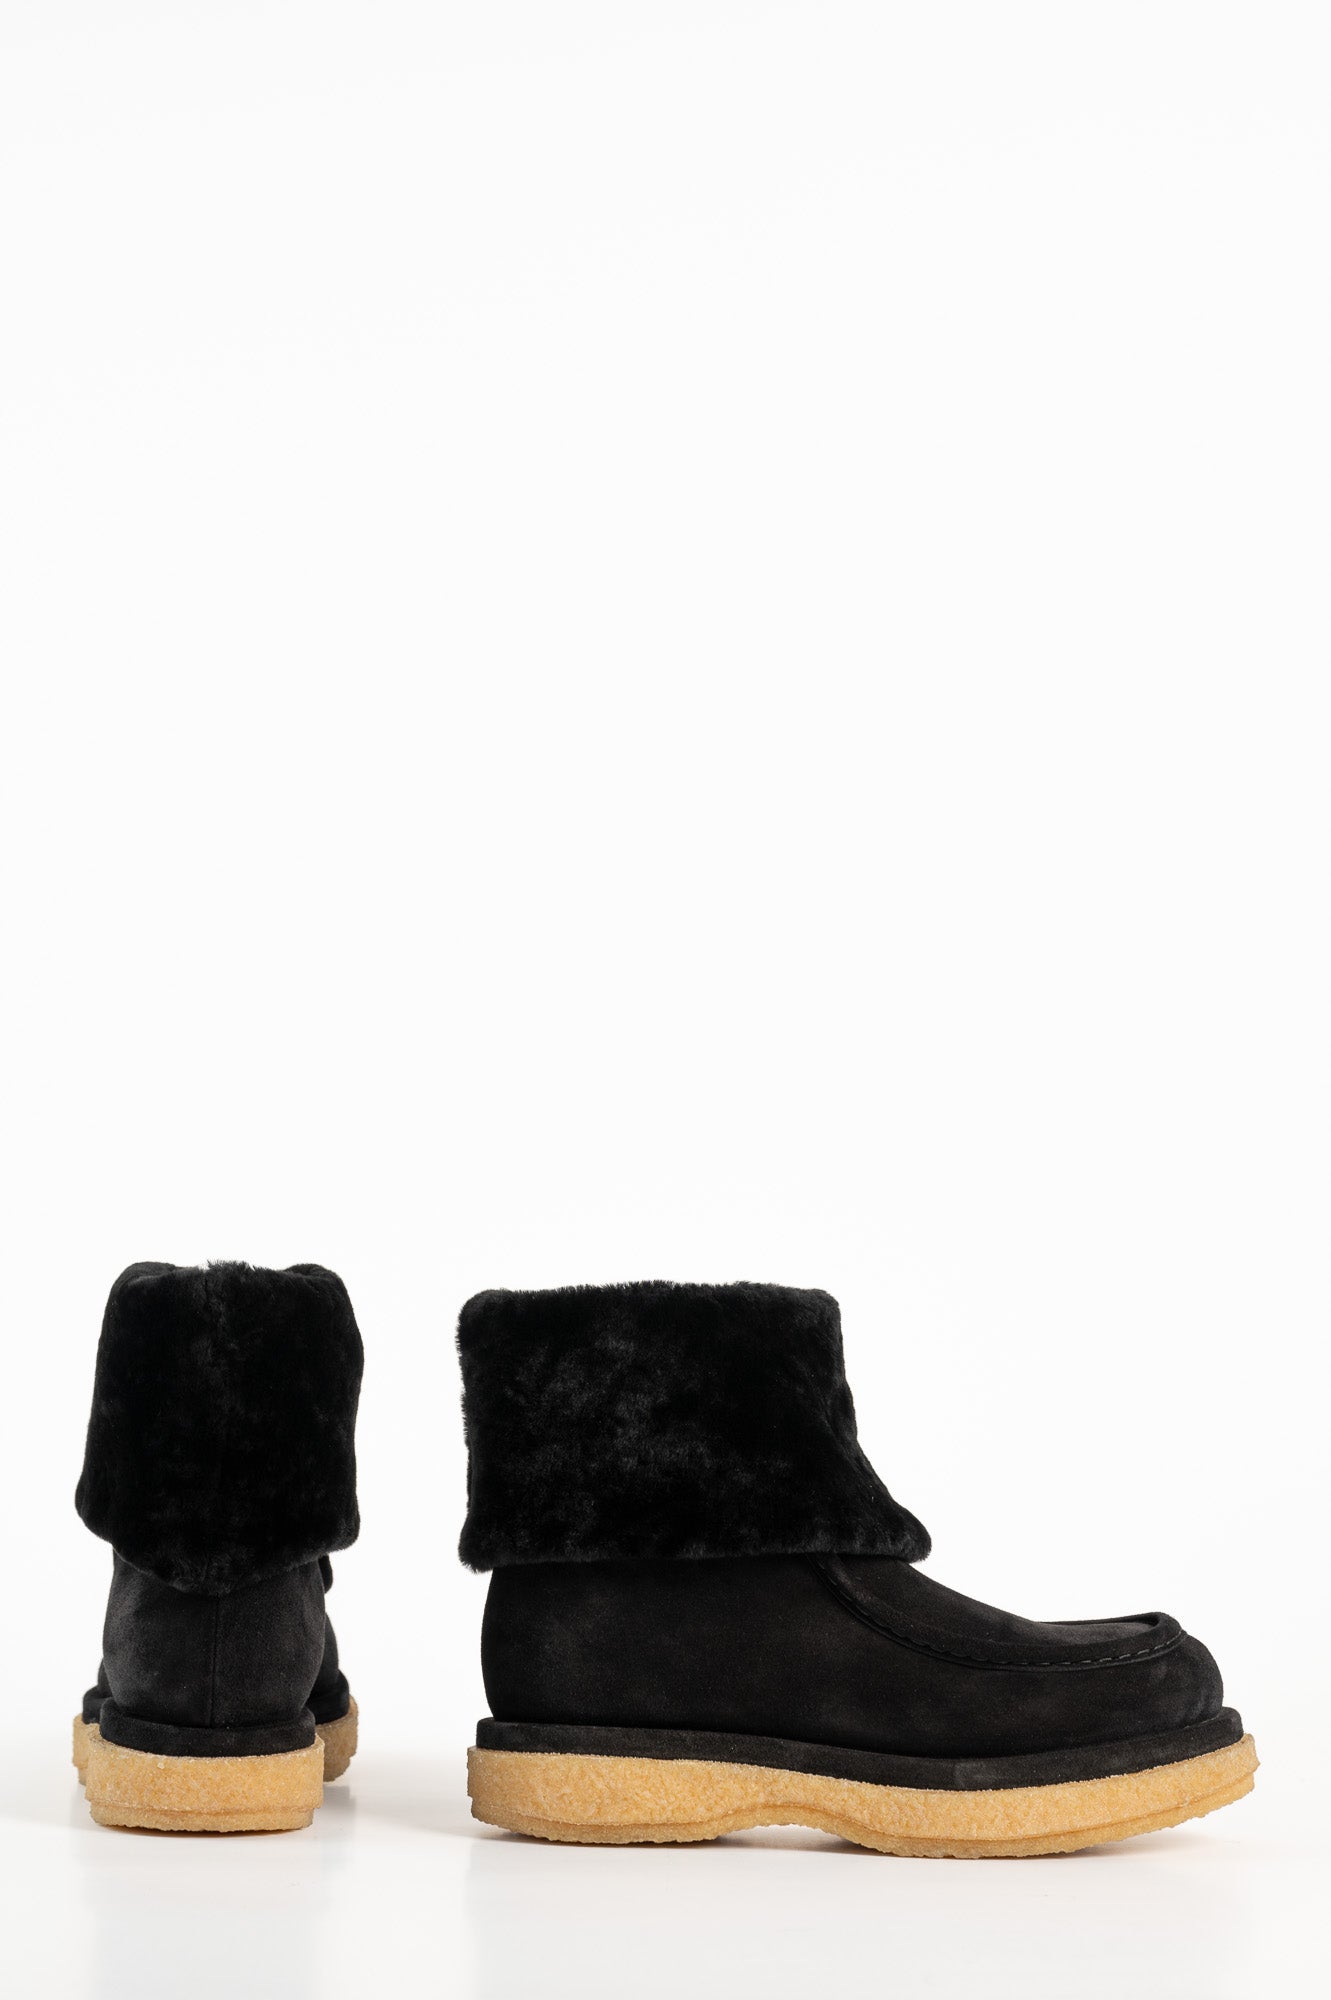 Warm Lined Boot Holyfur 214 | Black Suede